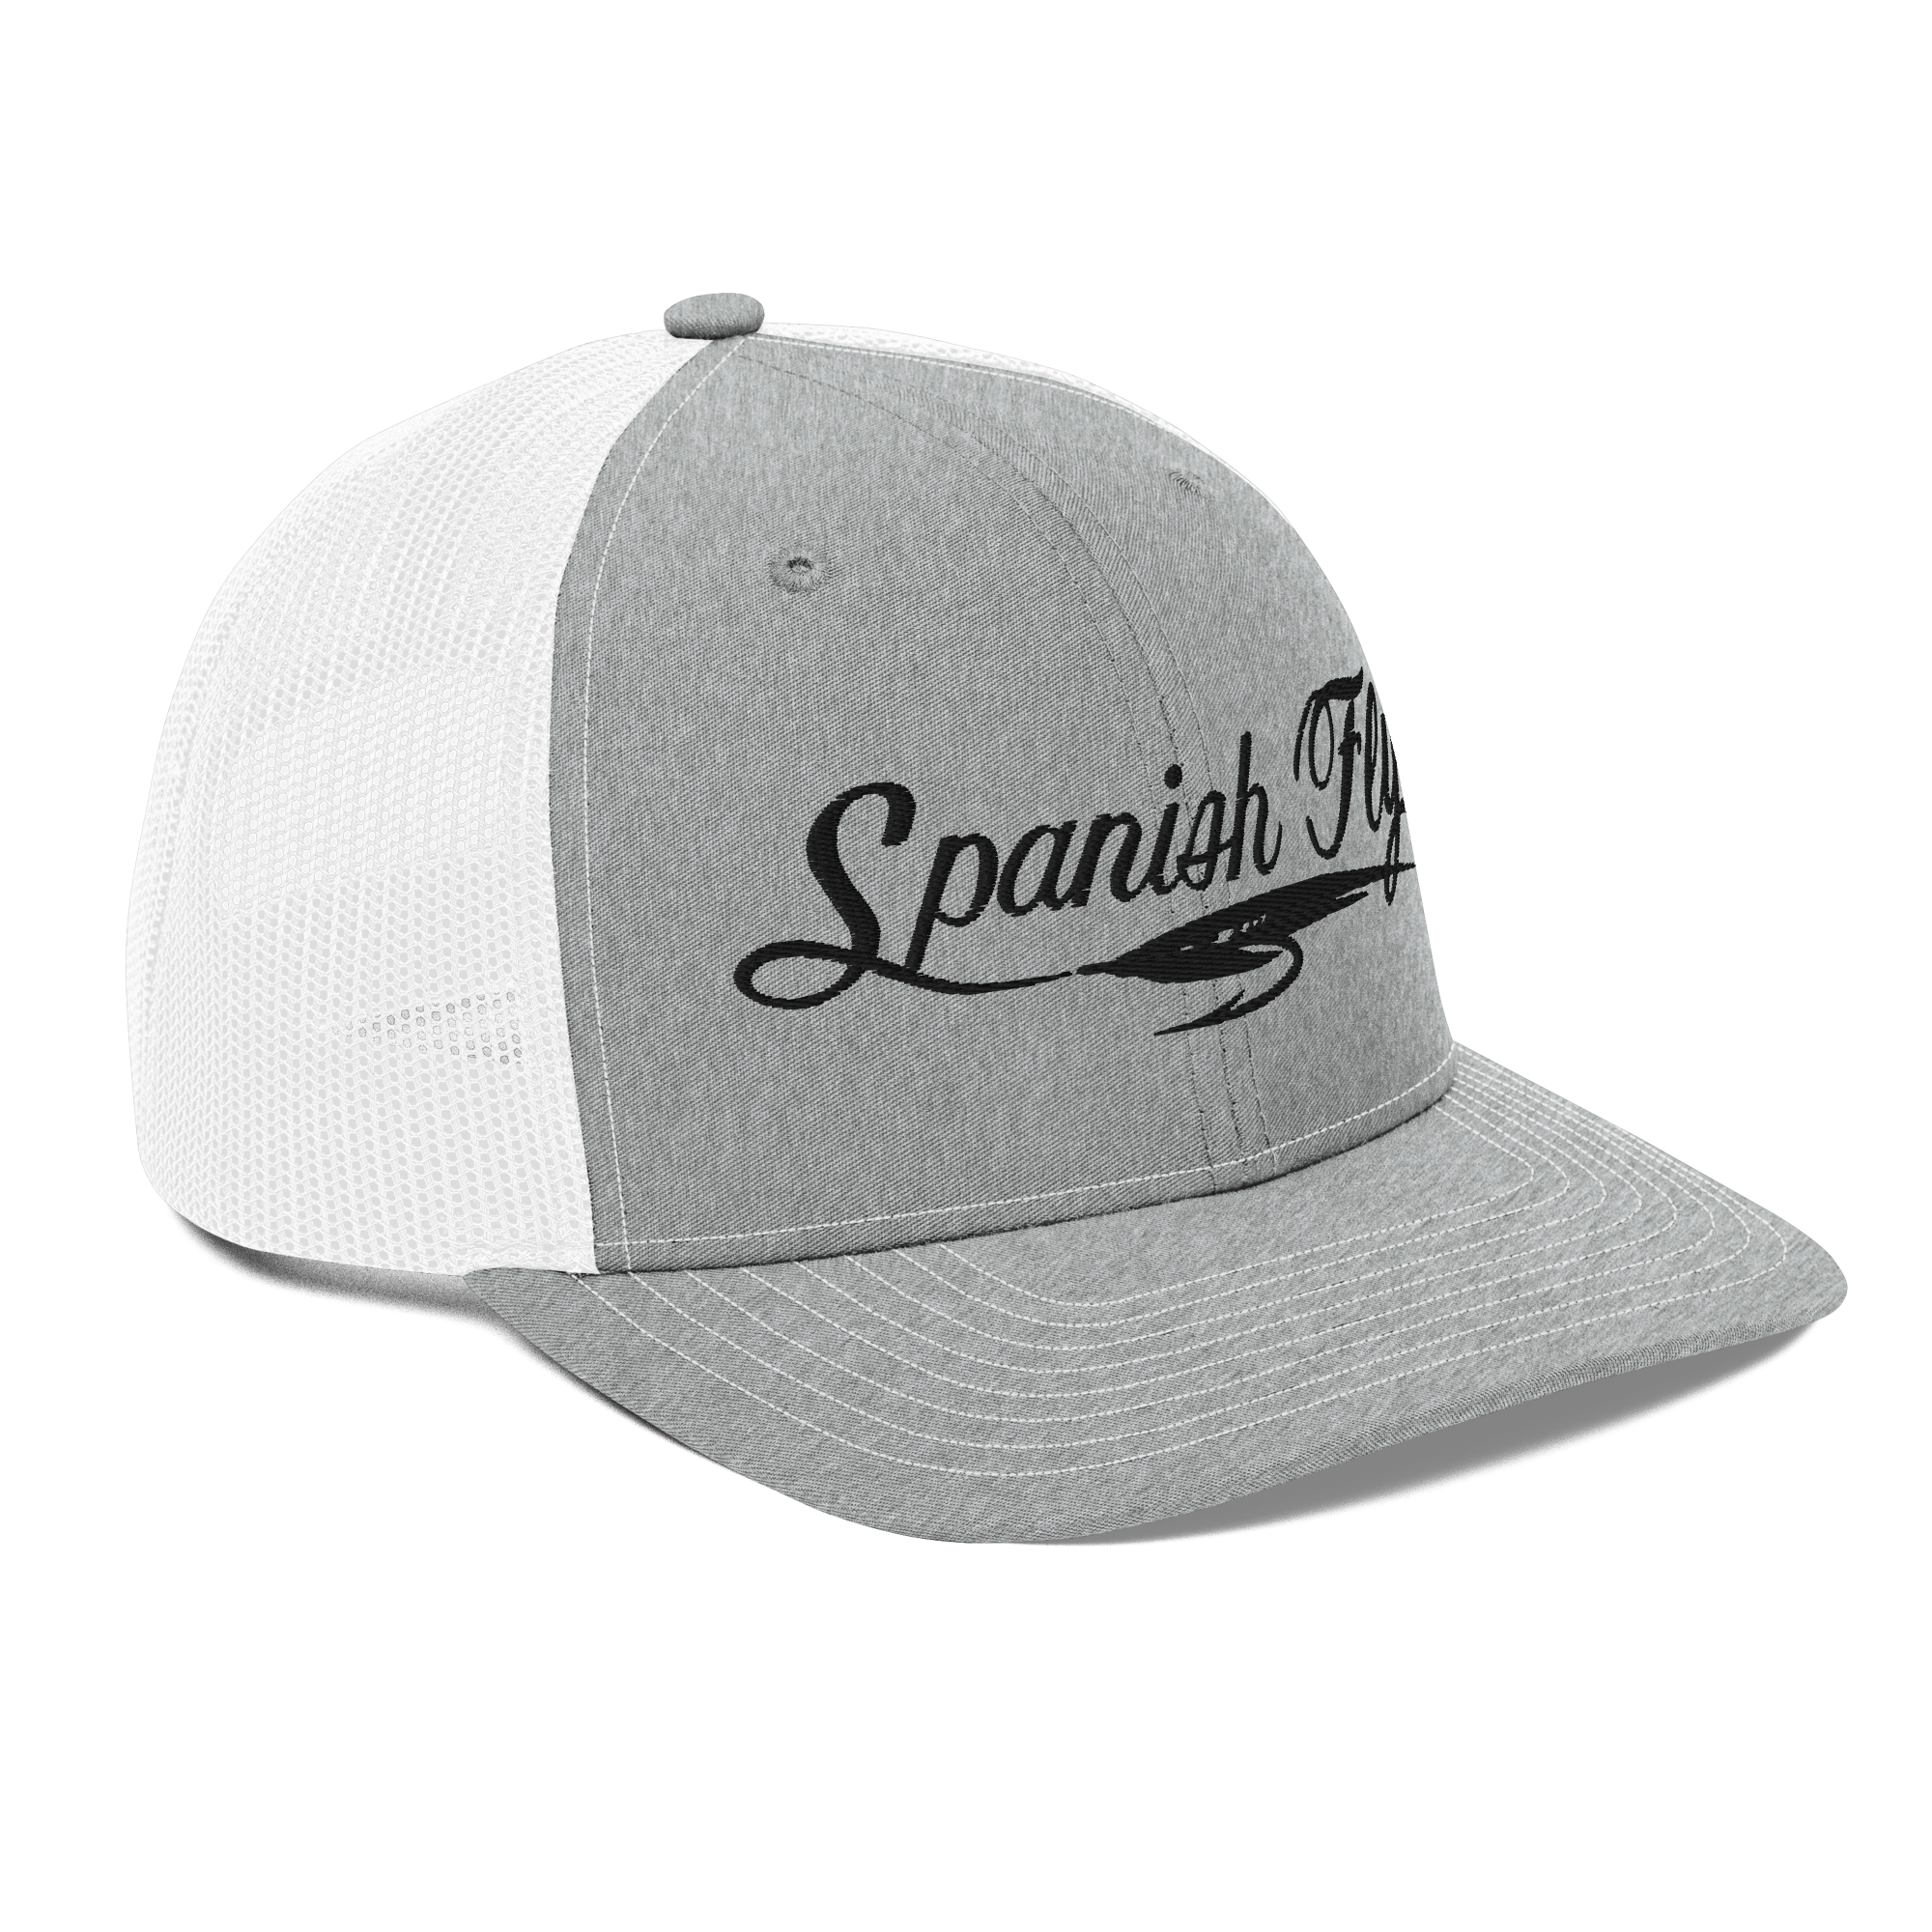 snapback-trucker-cap-heather-grey-white-right-front-649f2b699e58d.png